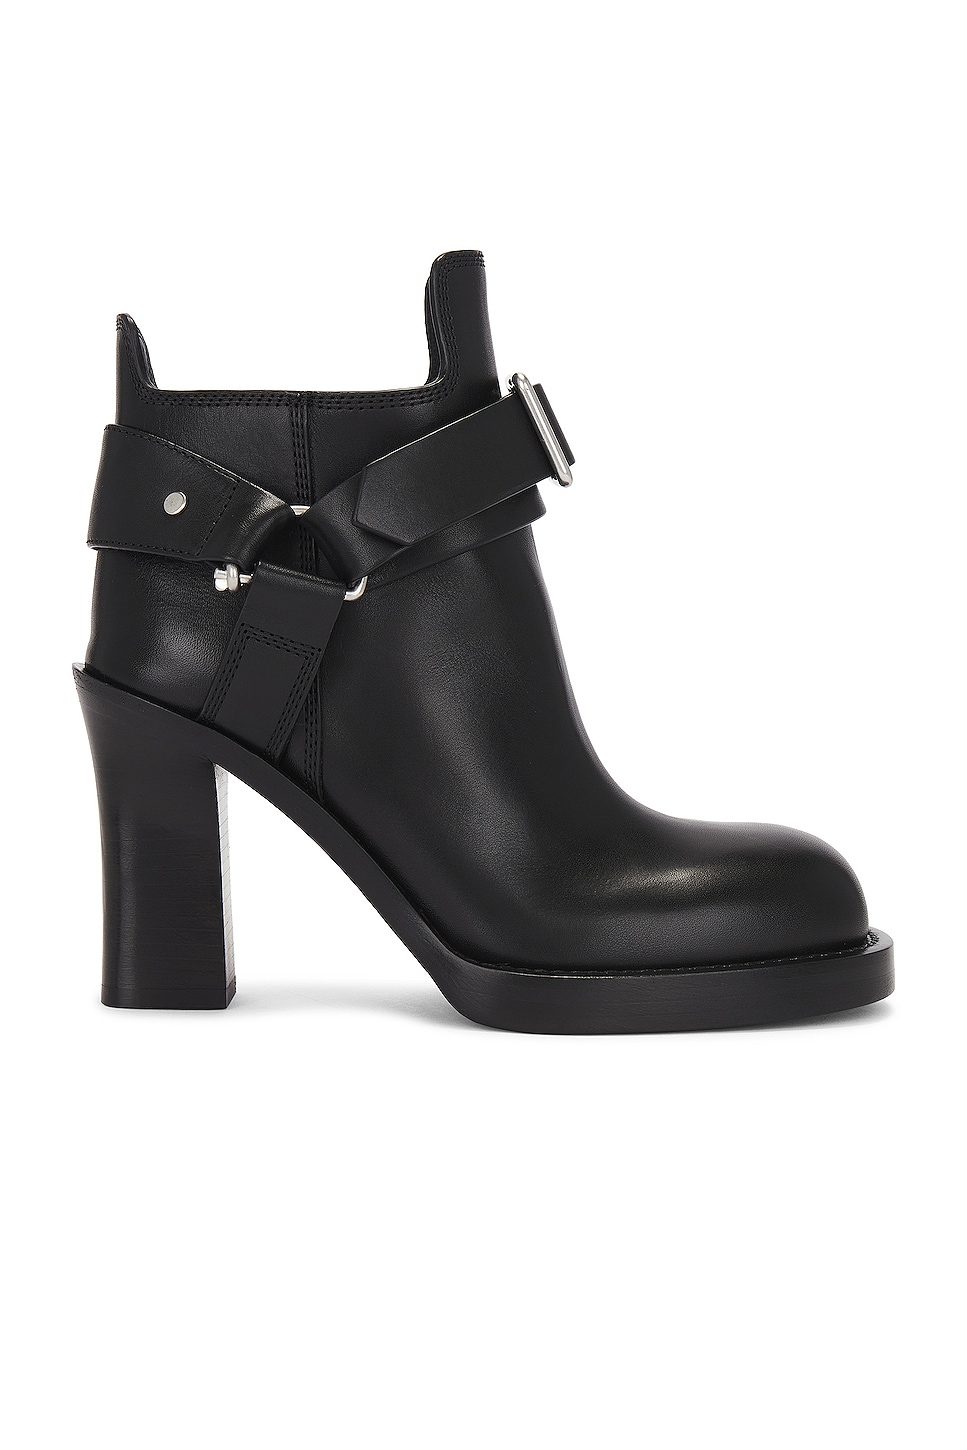 Image 1 of Burberry Stirrup Low Bootie in Black